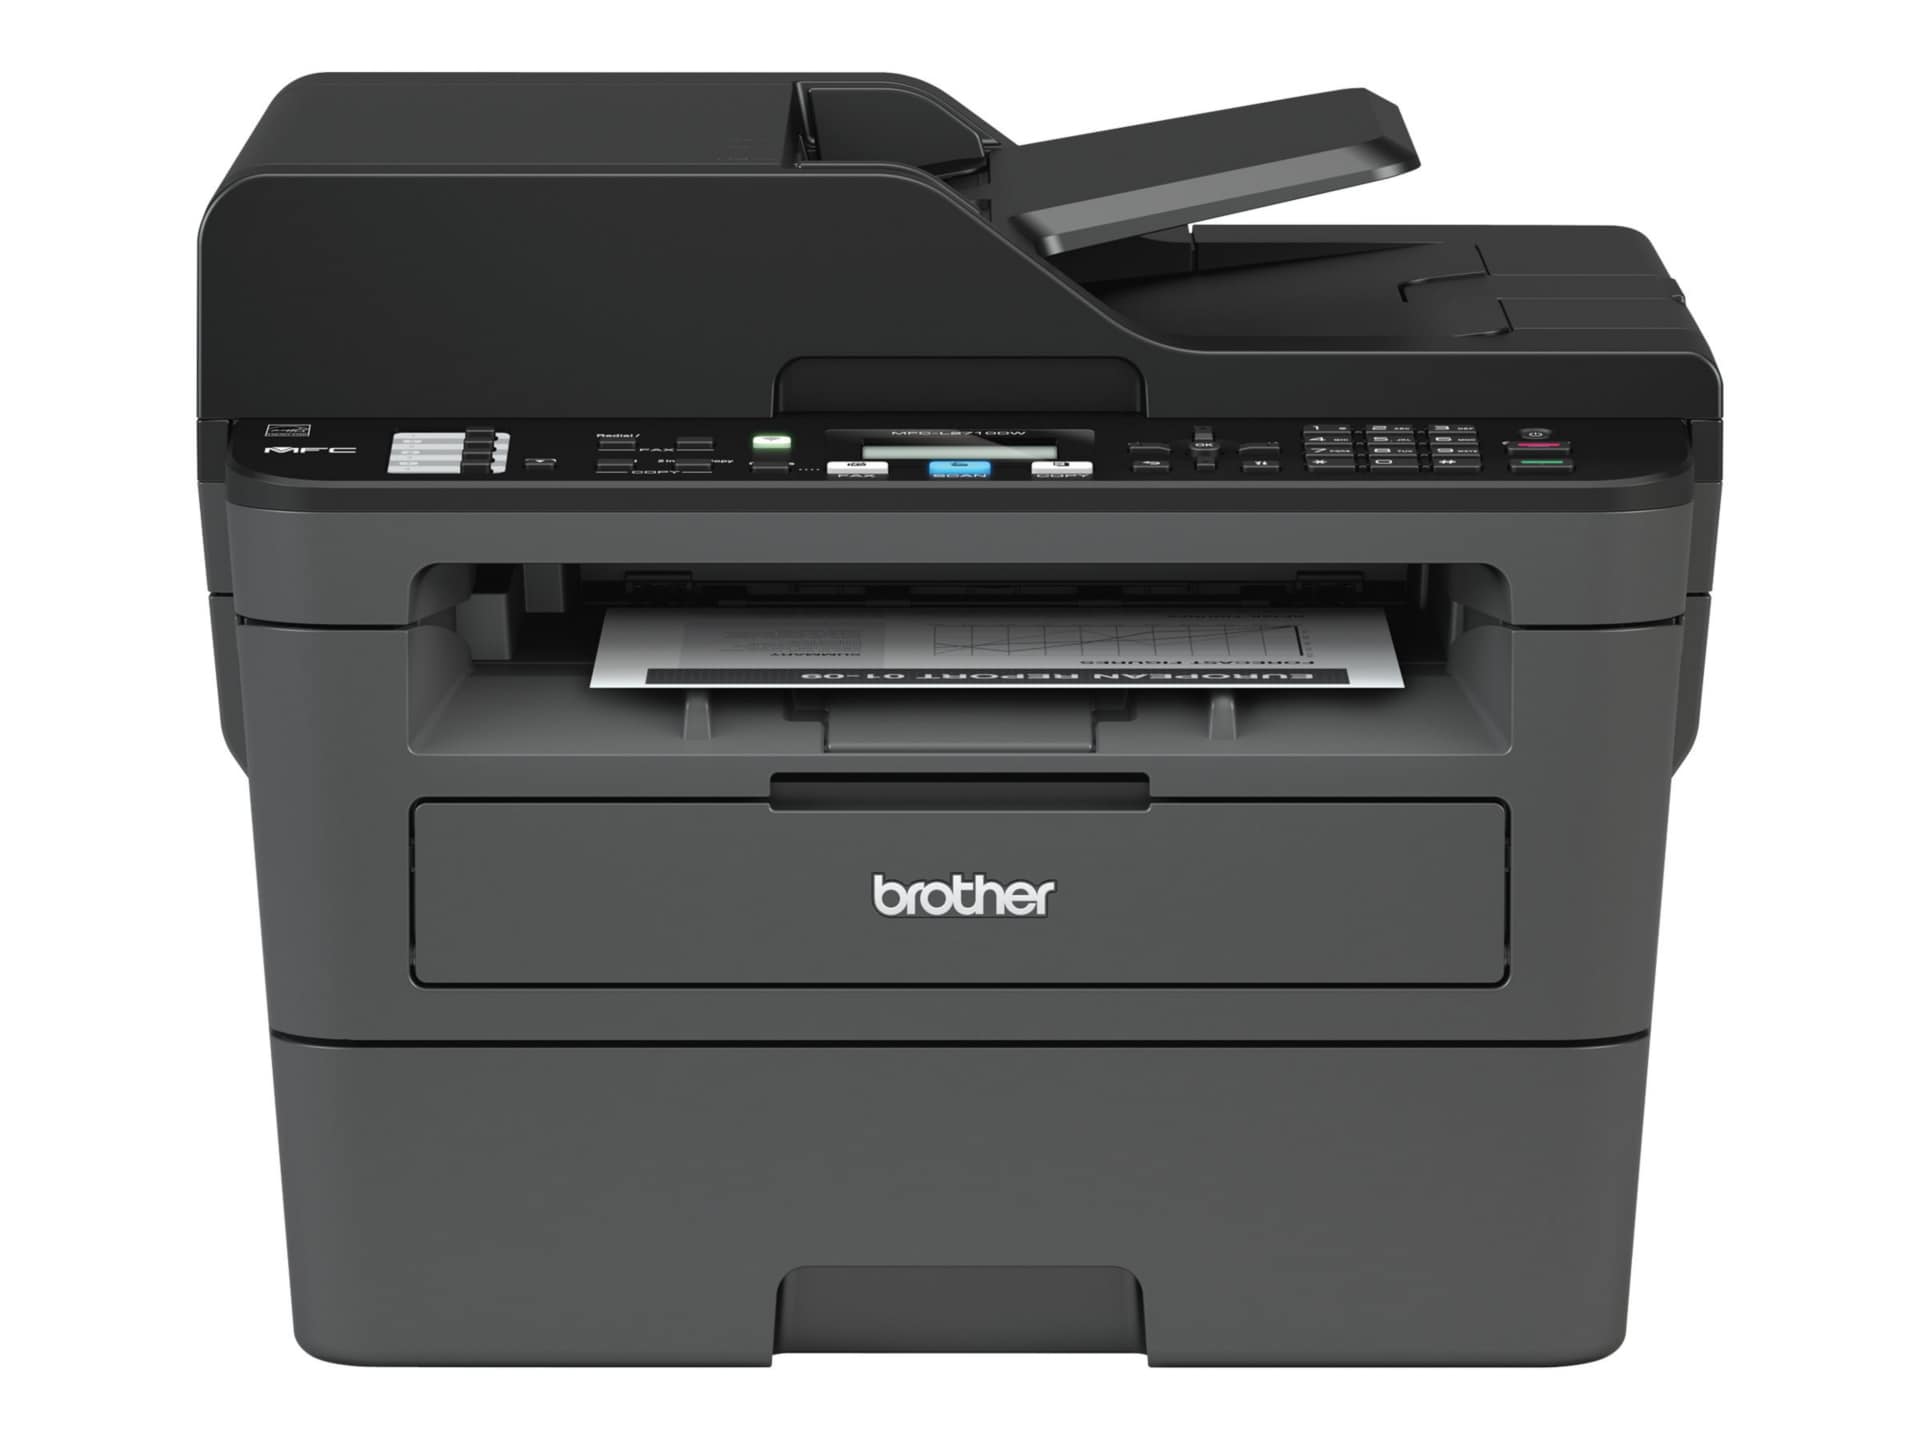 Brother　MFCL2710DW　printer　MFC-L2710DW　multifunction　Printers　B/W　All-in-One